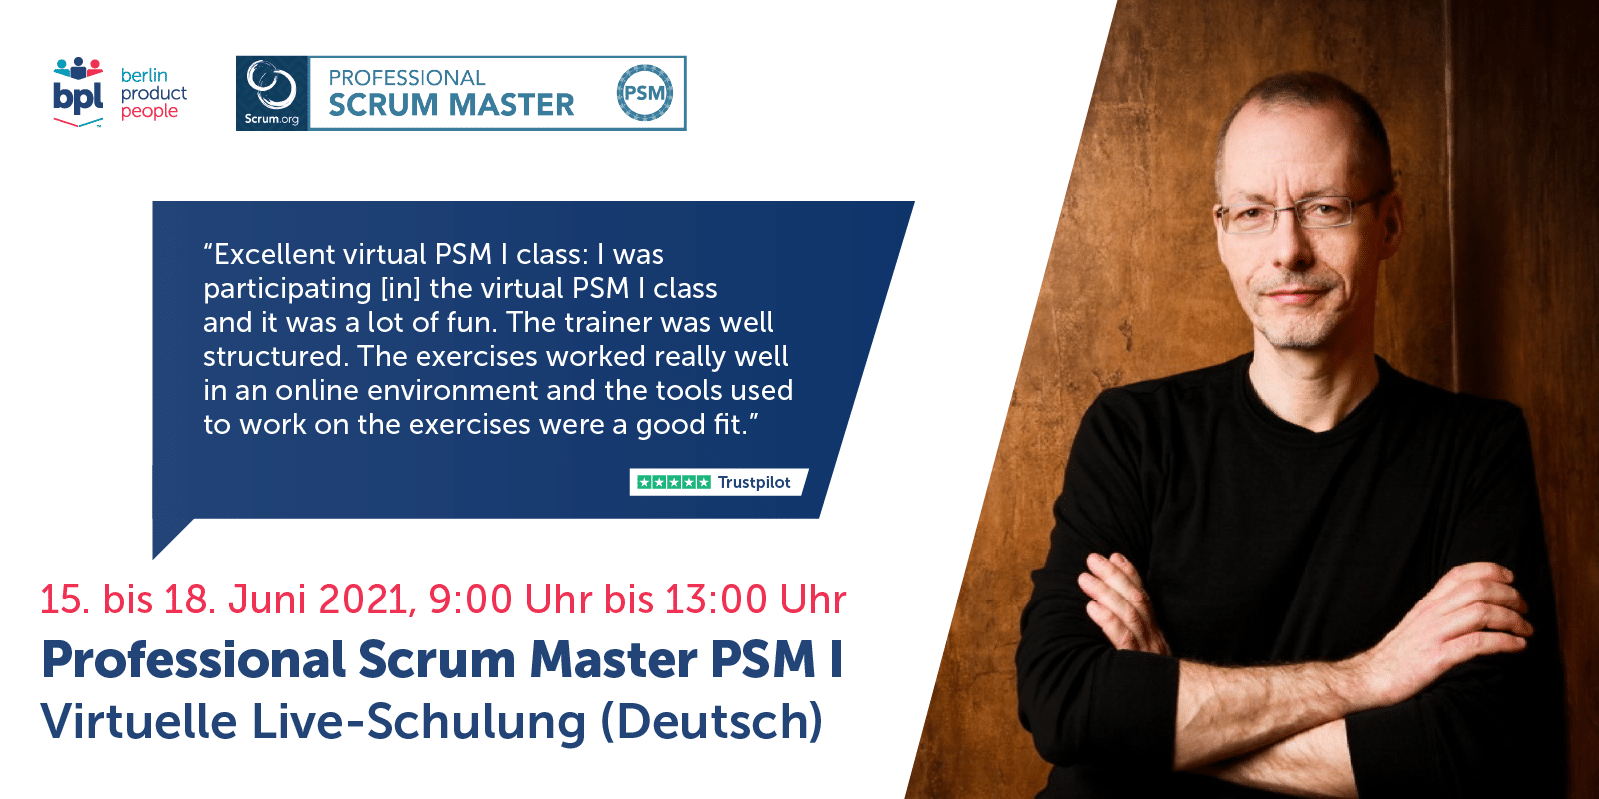 🖥 Professional Scrum Master Training w/ PSM I Certificate — Live Virtual Class: June 15-18, 2021 — Berlin Product People GmbH